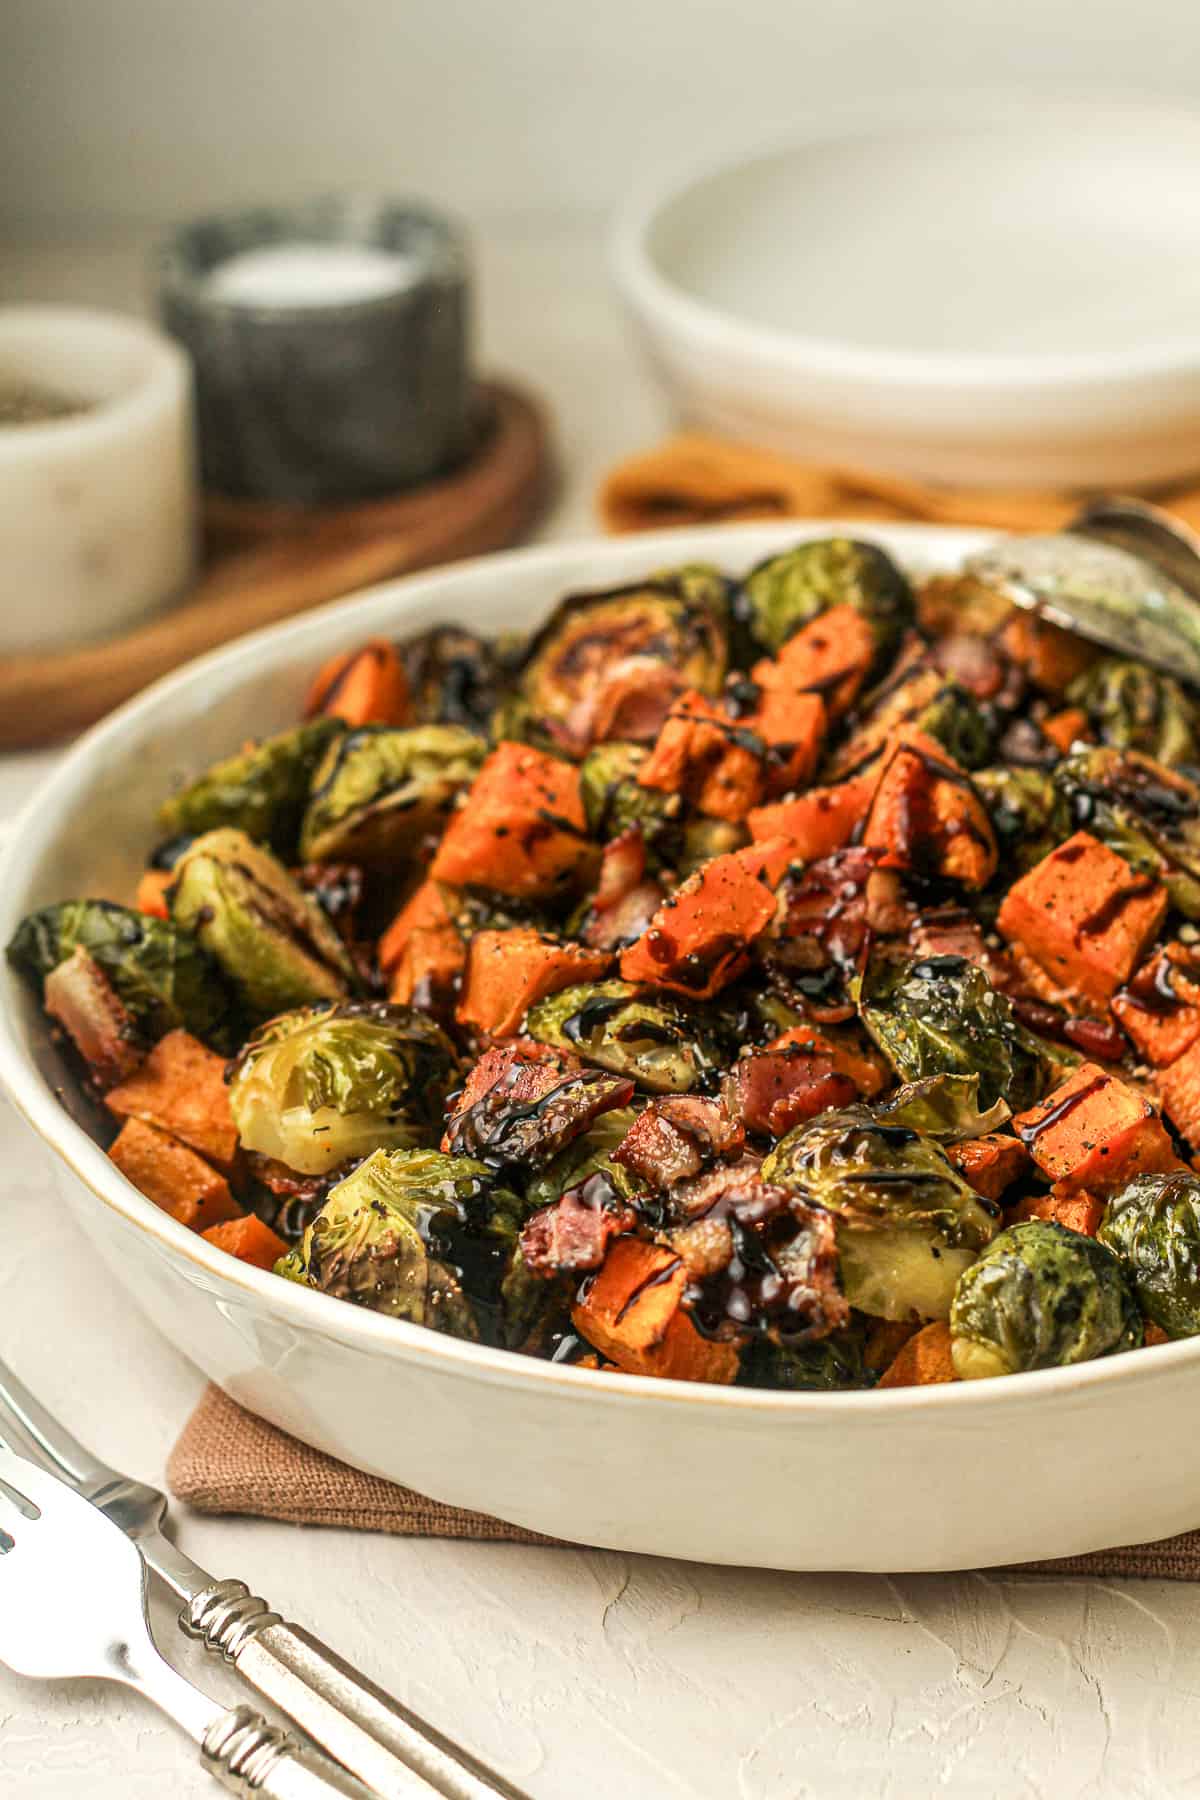 Side view of a serving bowl of roasted veggies with balsamic glaze.